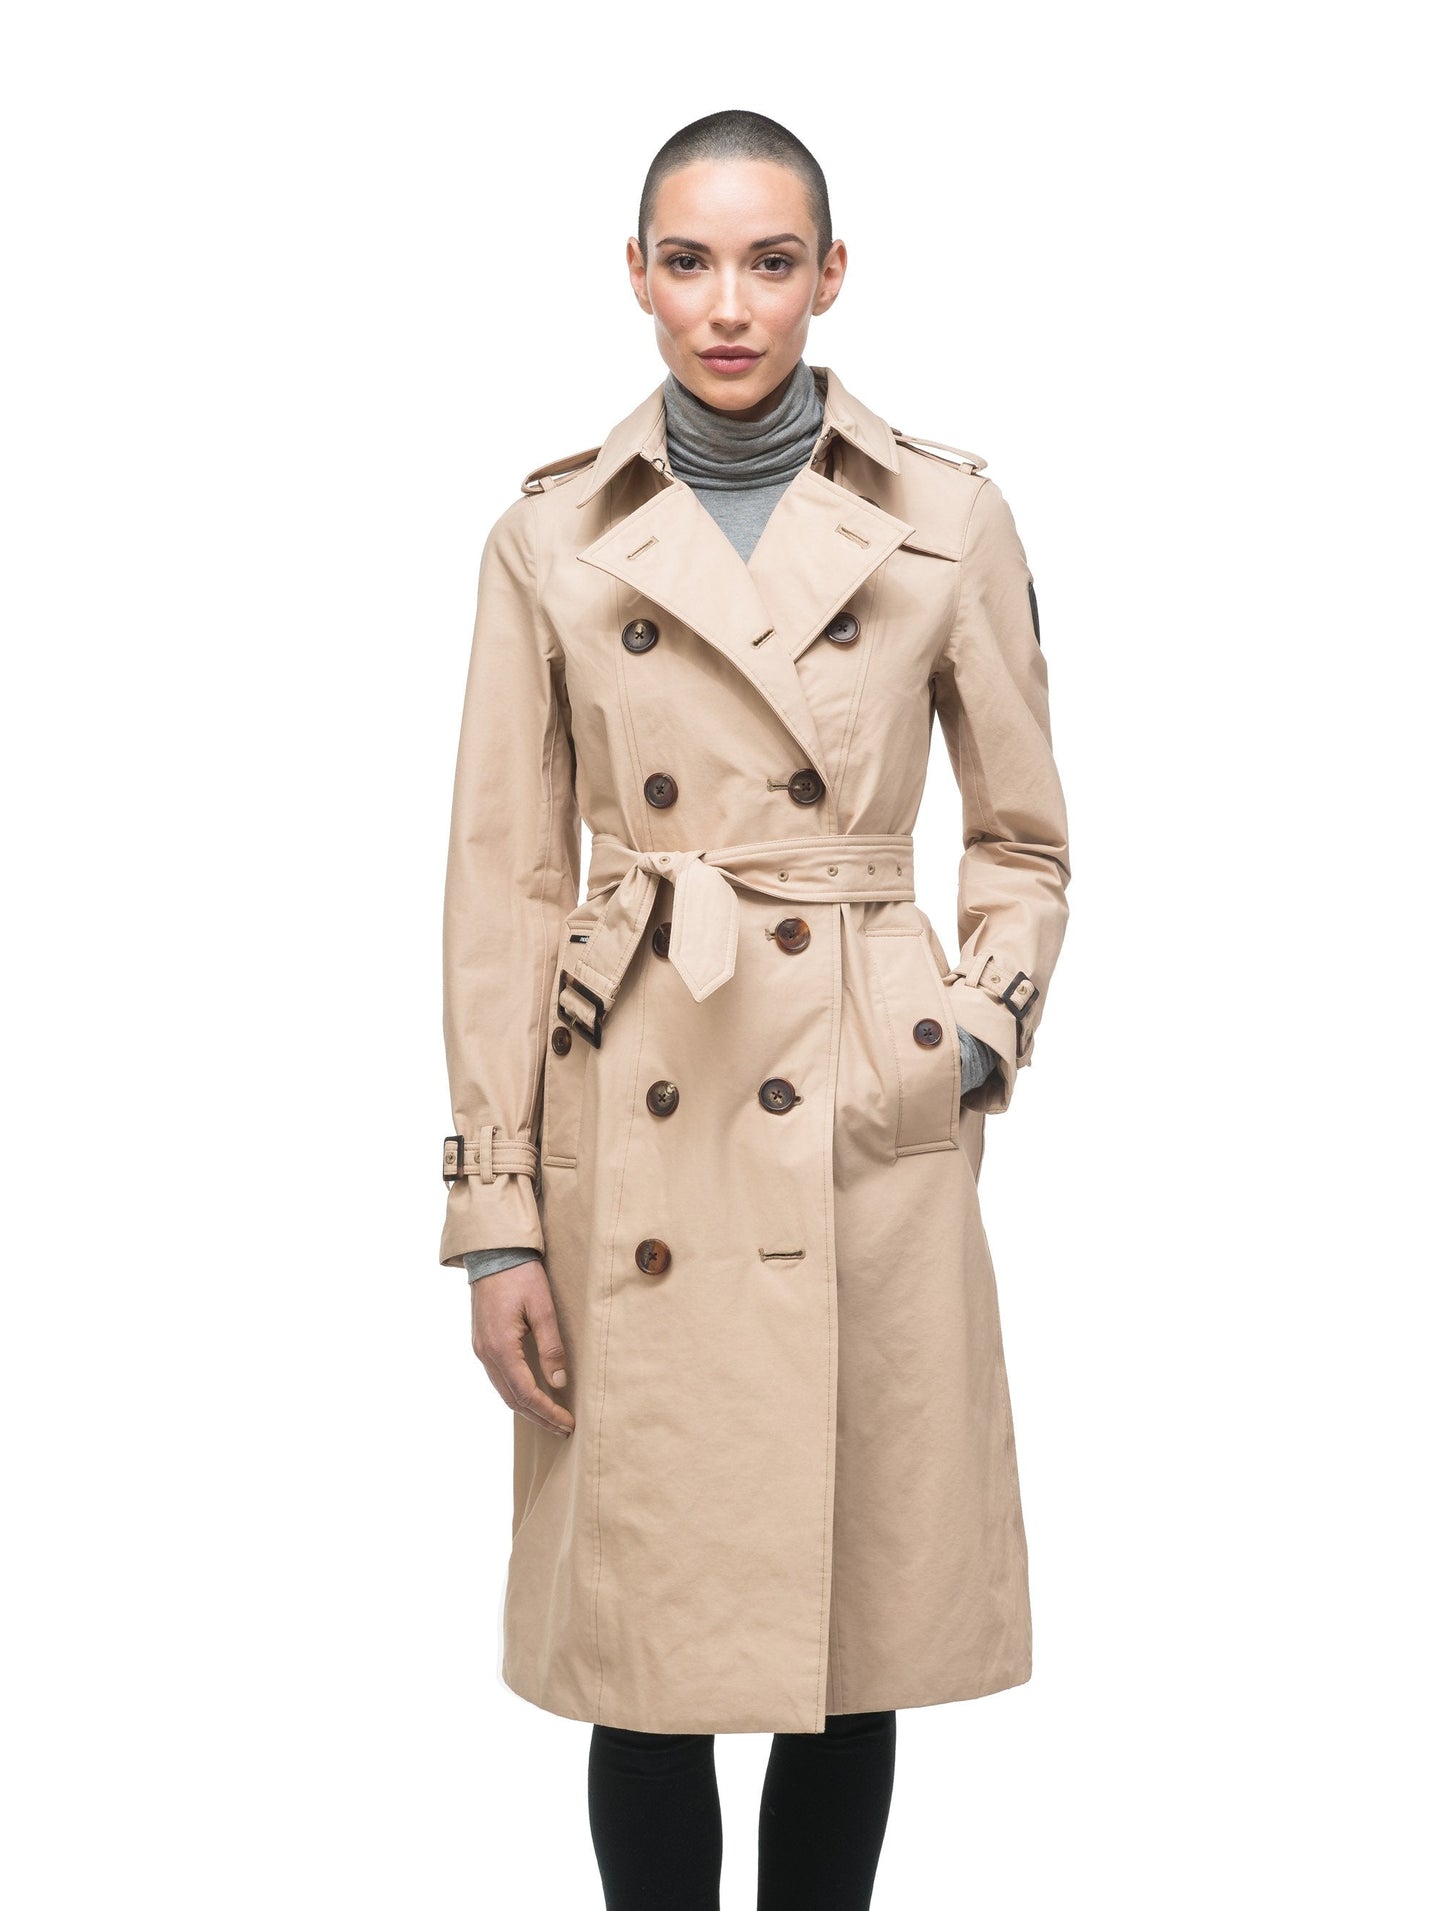 Women's knee length trench coat with removable belt in Fawn